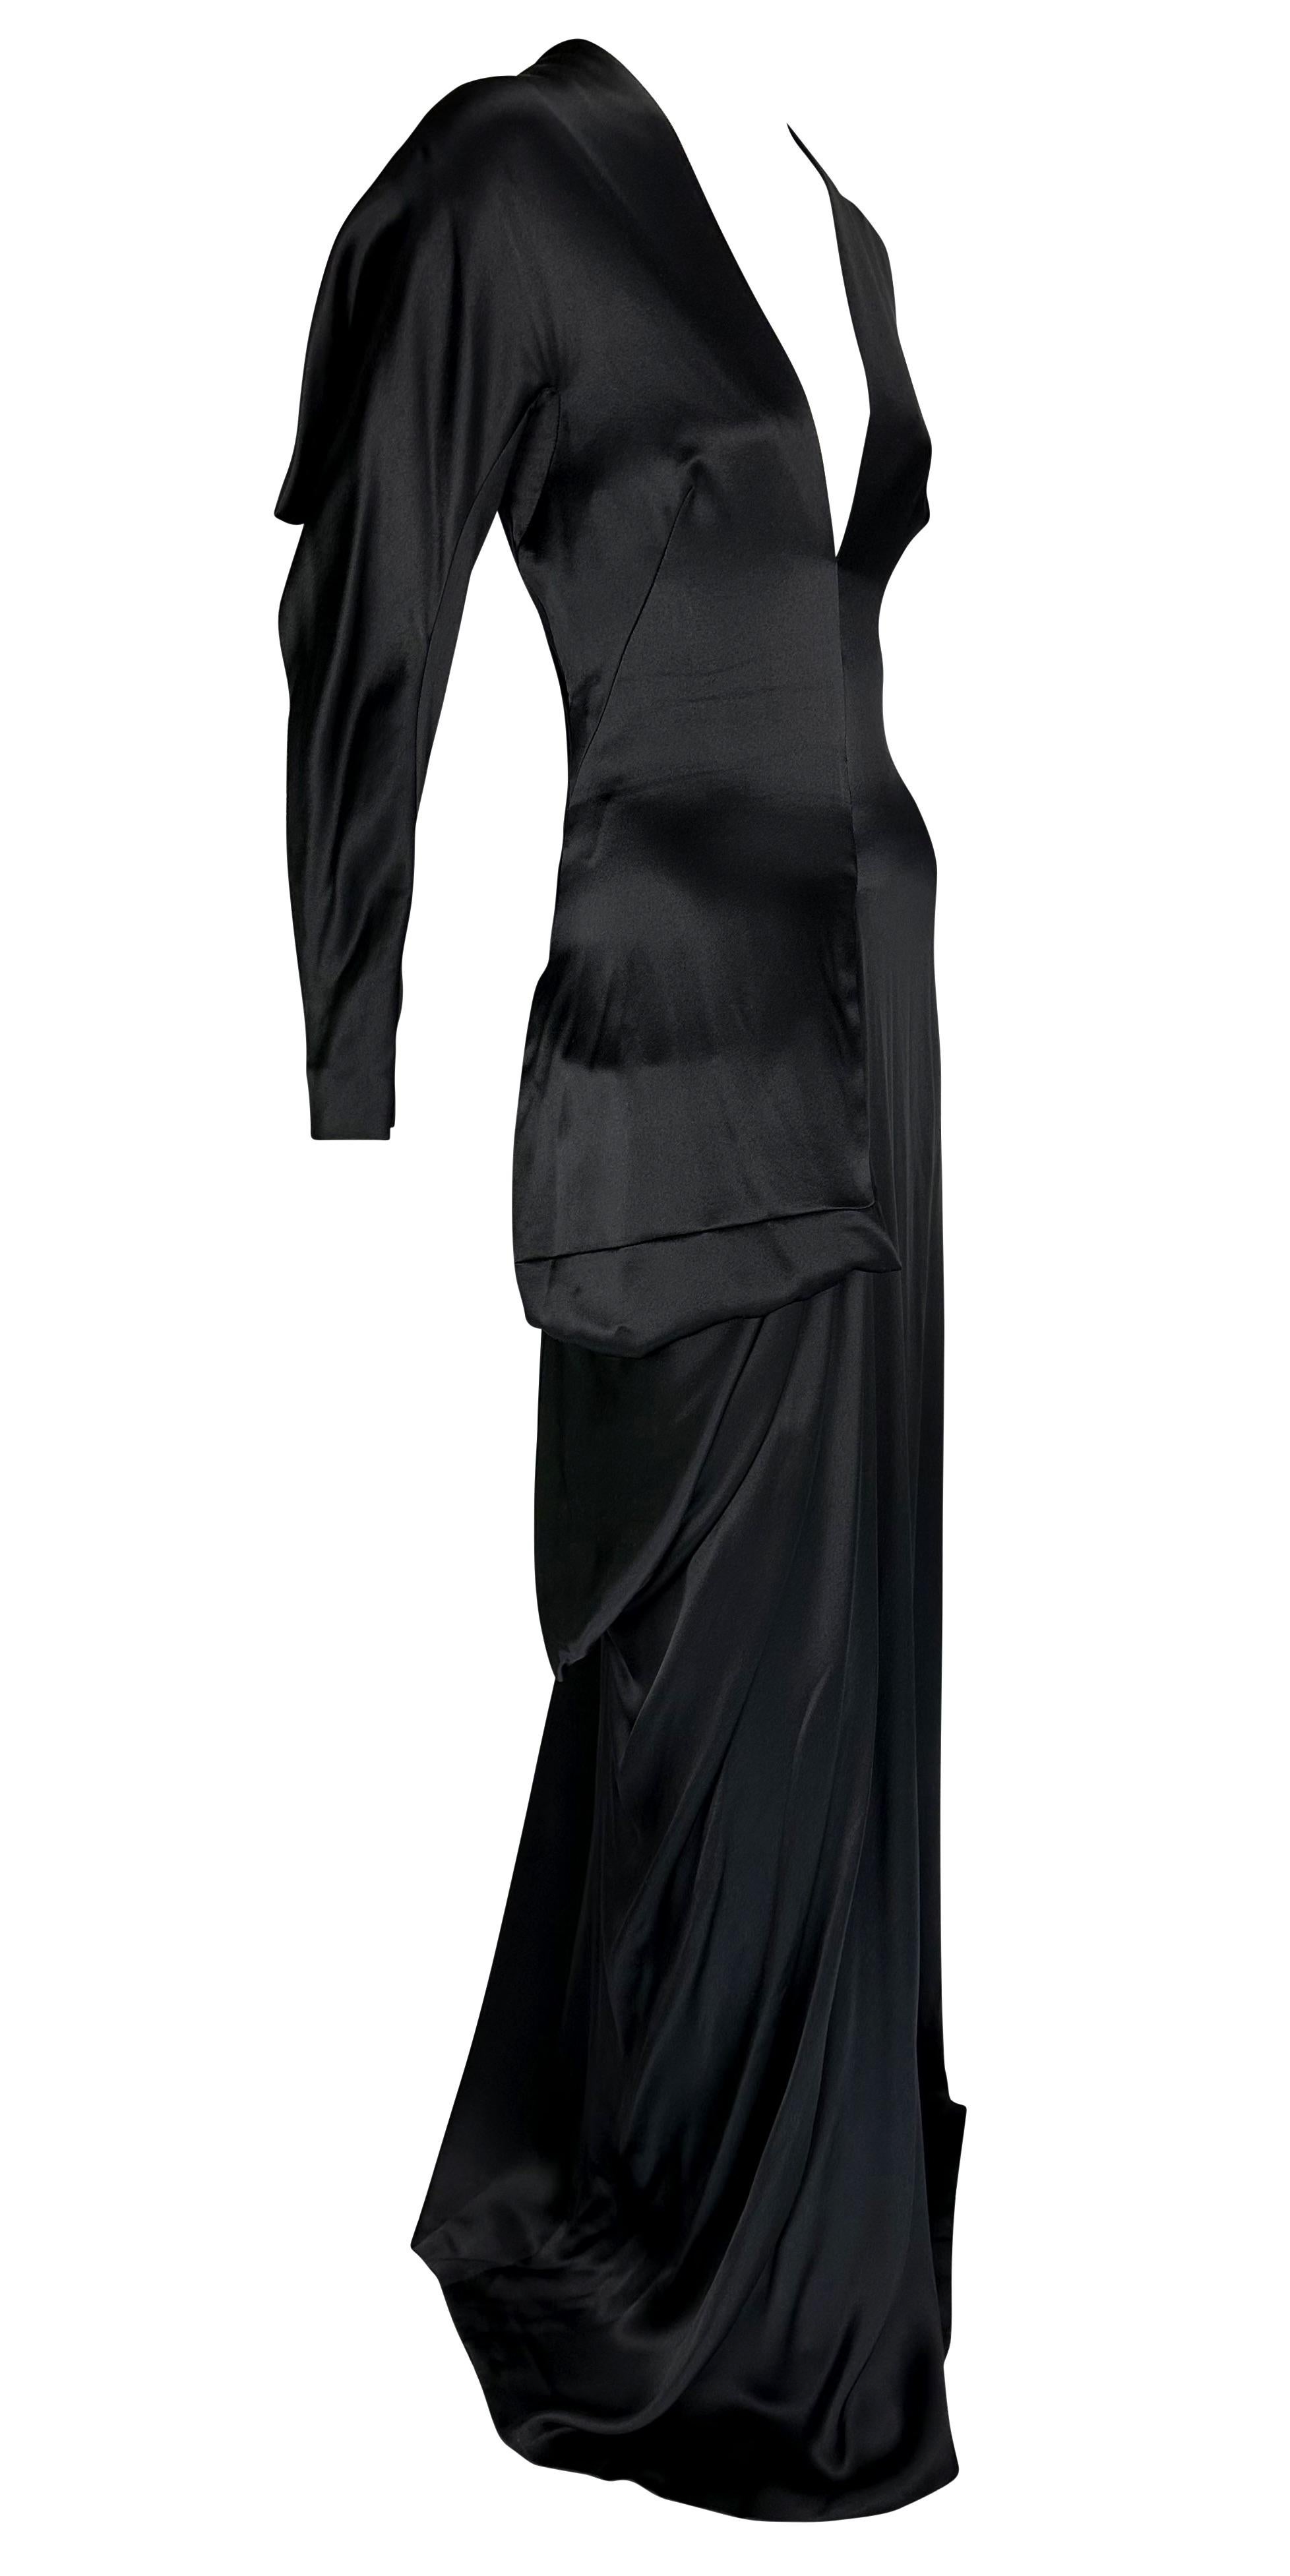 F/W 2010 Alexander McQueen Angels & Demons Asymmetric Structural Black Silk Gown In Excellent Condition For Sale In West Hollywood, CA